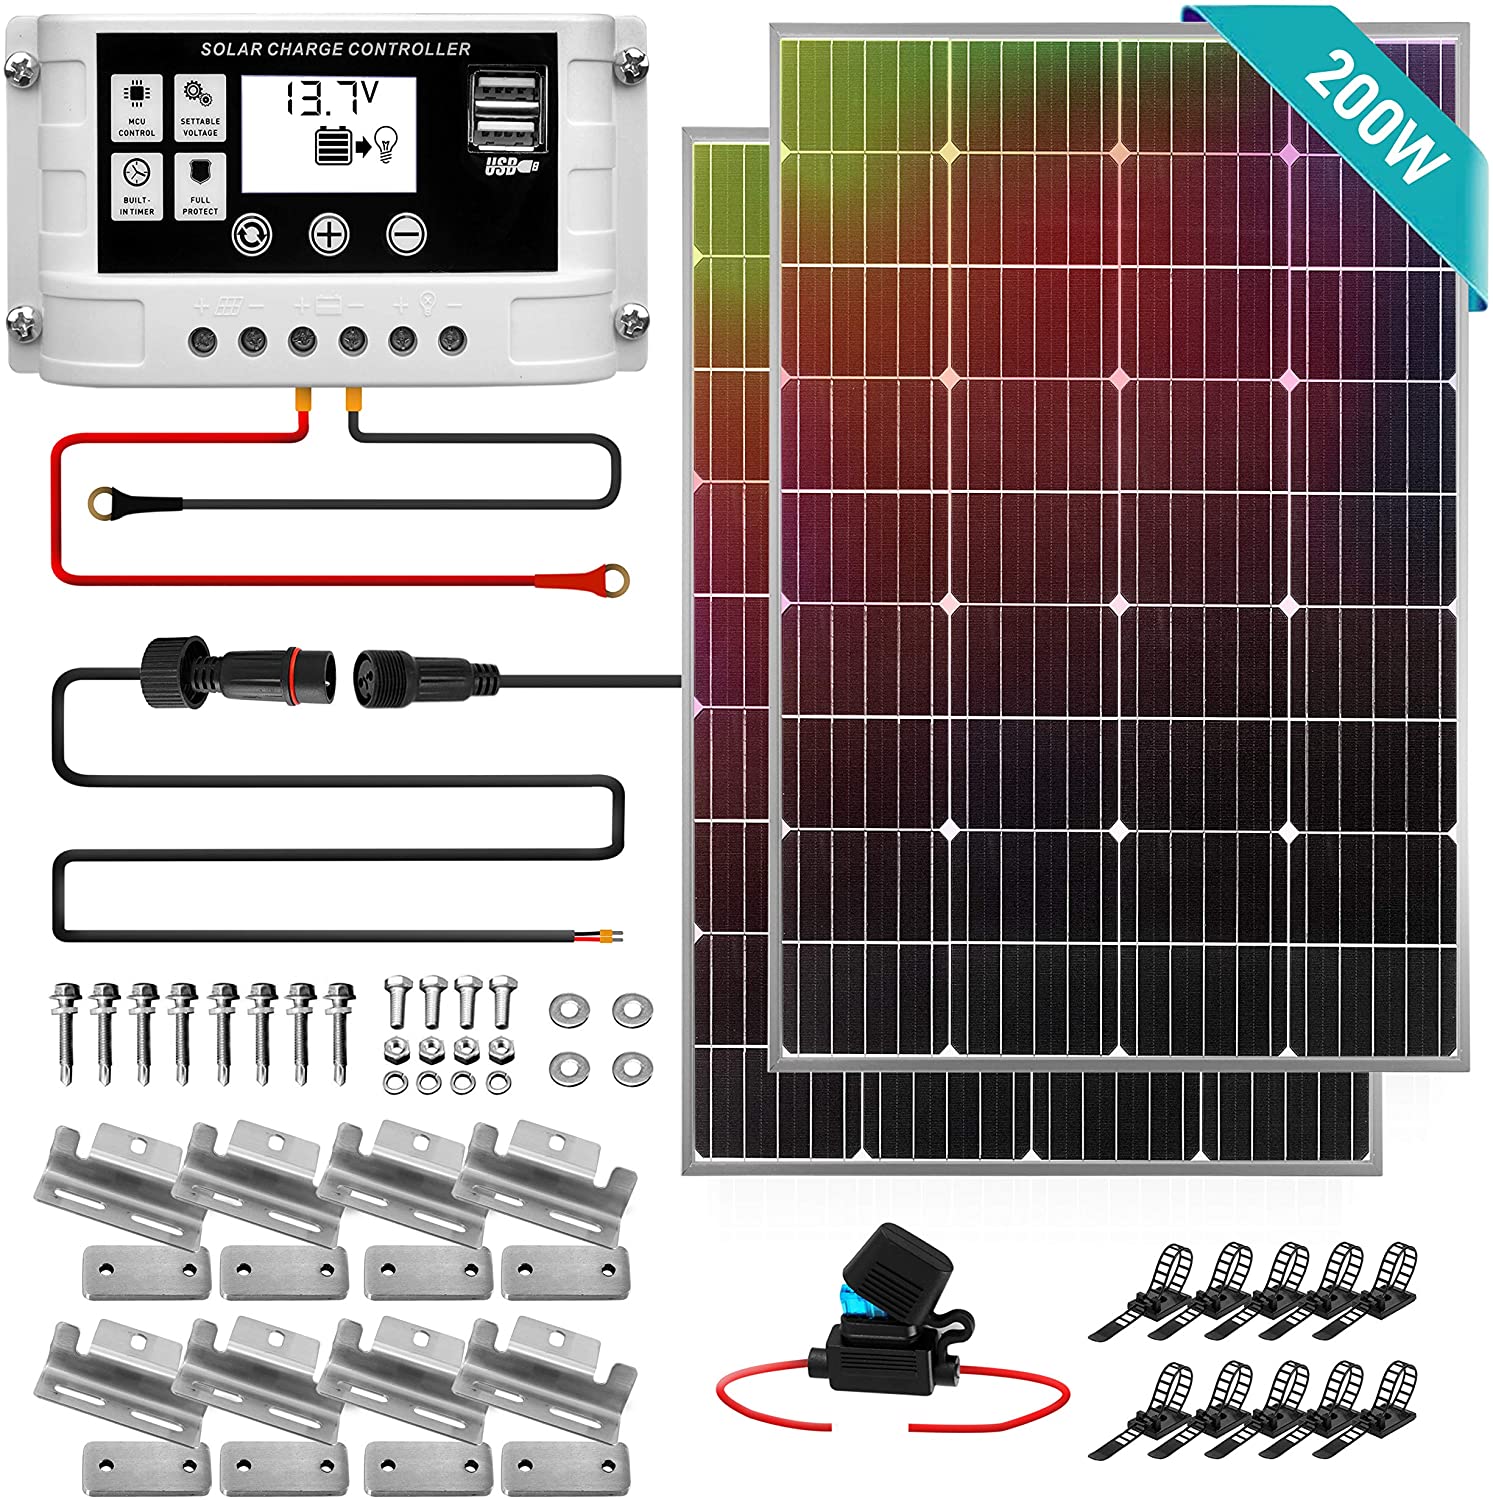 SereneLife 200W Solar Panel Starter Kit - 12v Monocrystalline Portable Mono Solar Panel Starter Kit w/ 3 ft 11AWG Cable Set, 30A PWM Controller w/LCD - Van Campers, Car Roof, Boat SLSPSKT200 (2 Pcs) (200w)